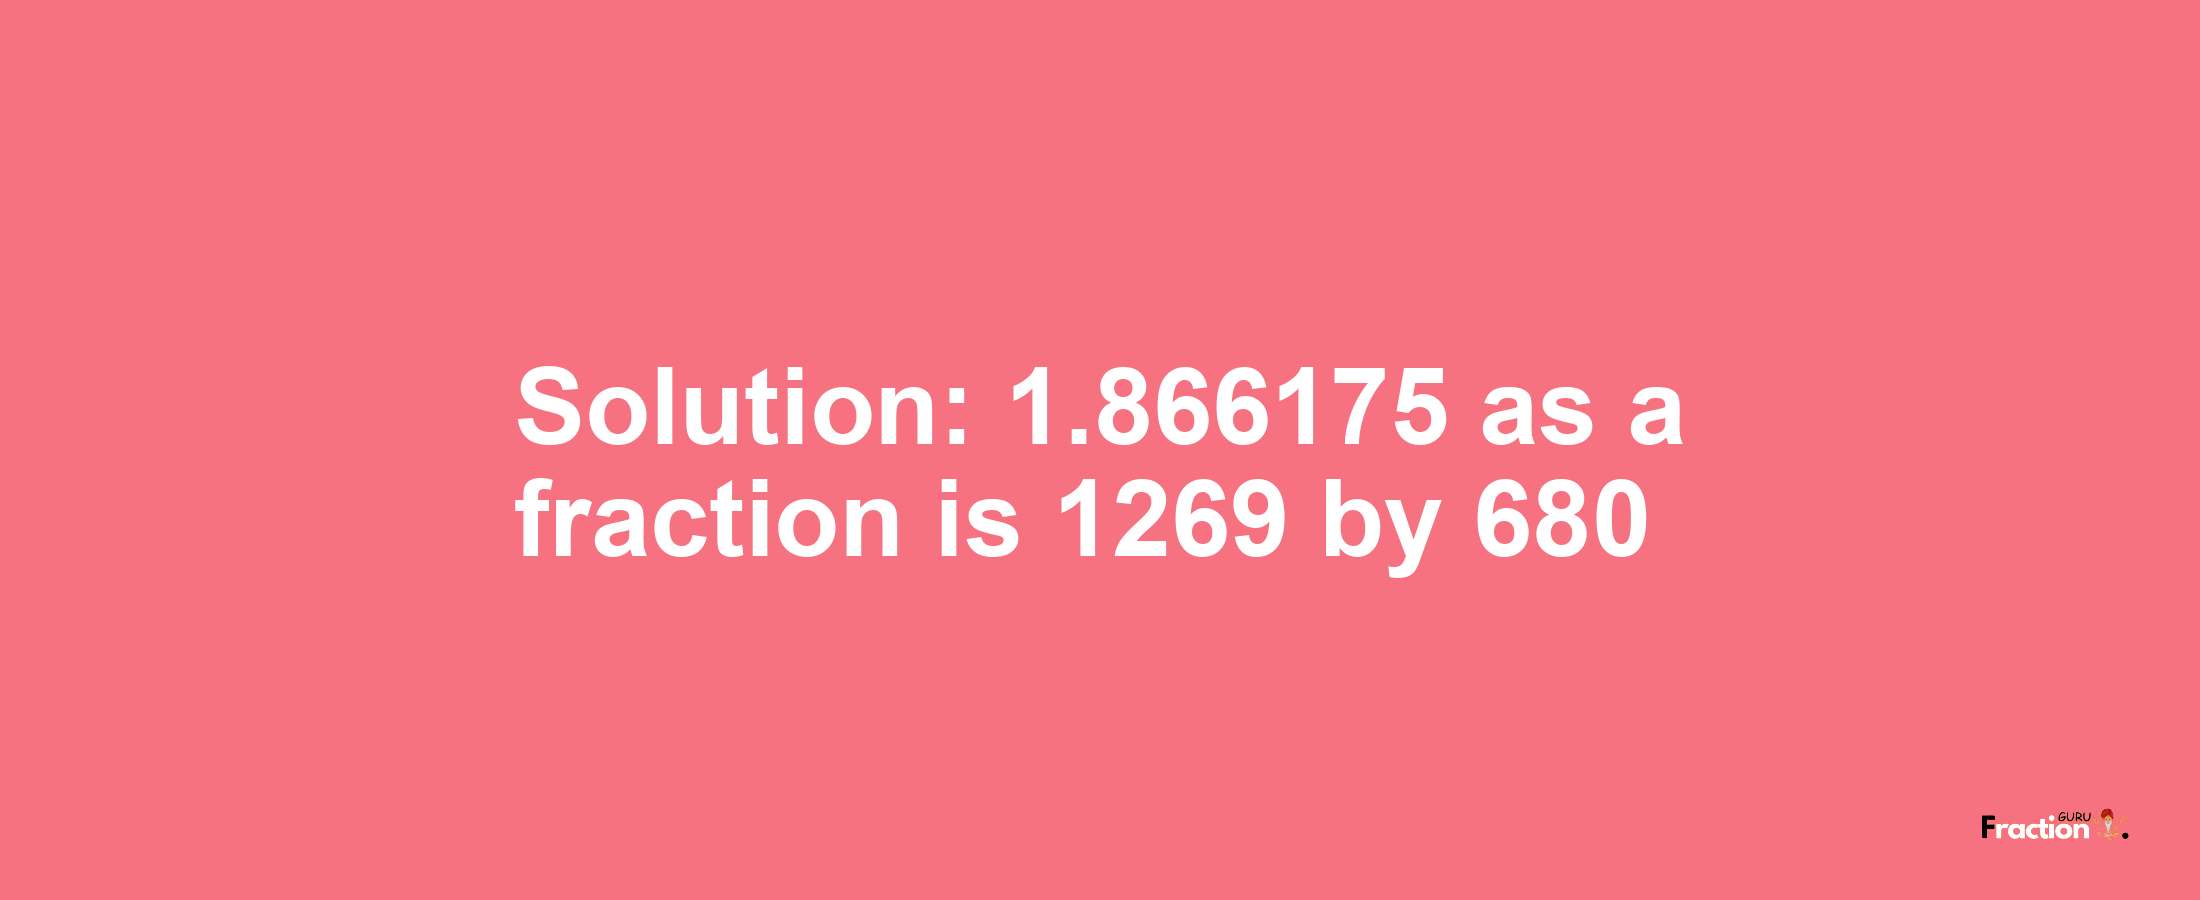 Solution:1.866175 as a fraction is 1269/680